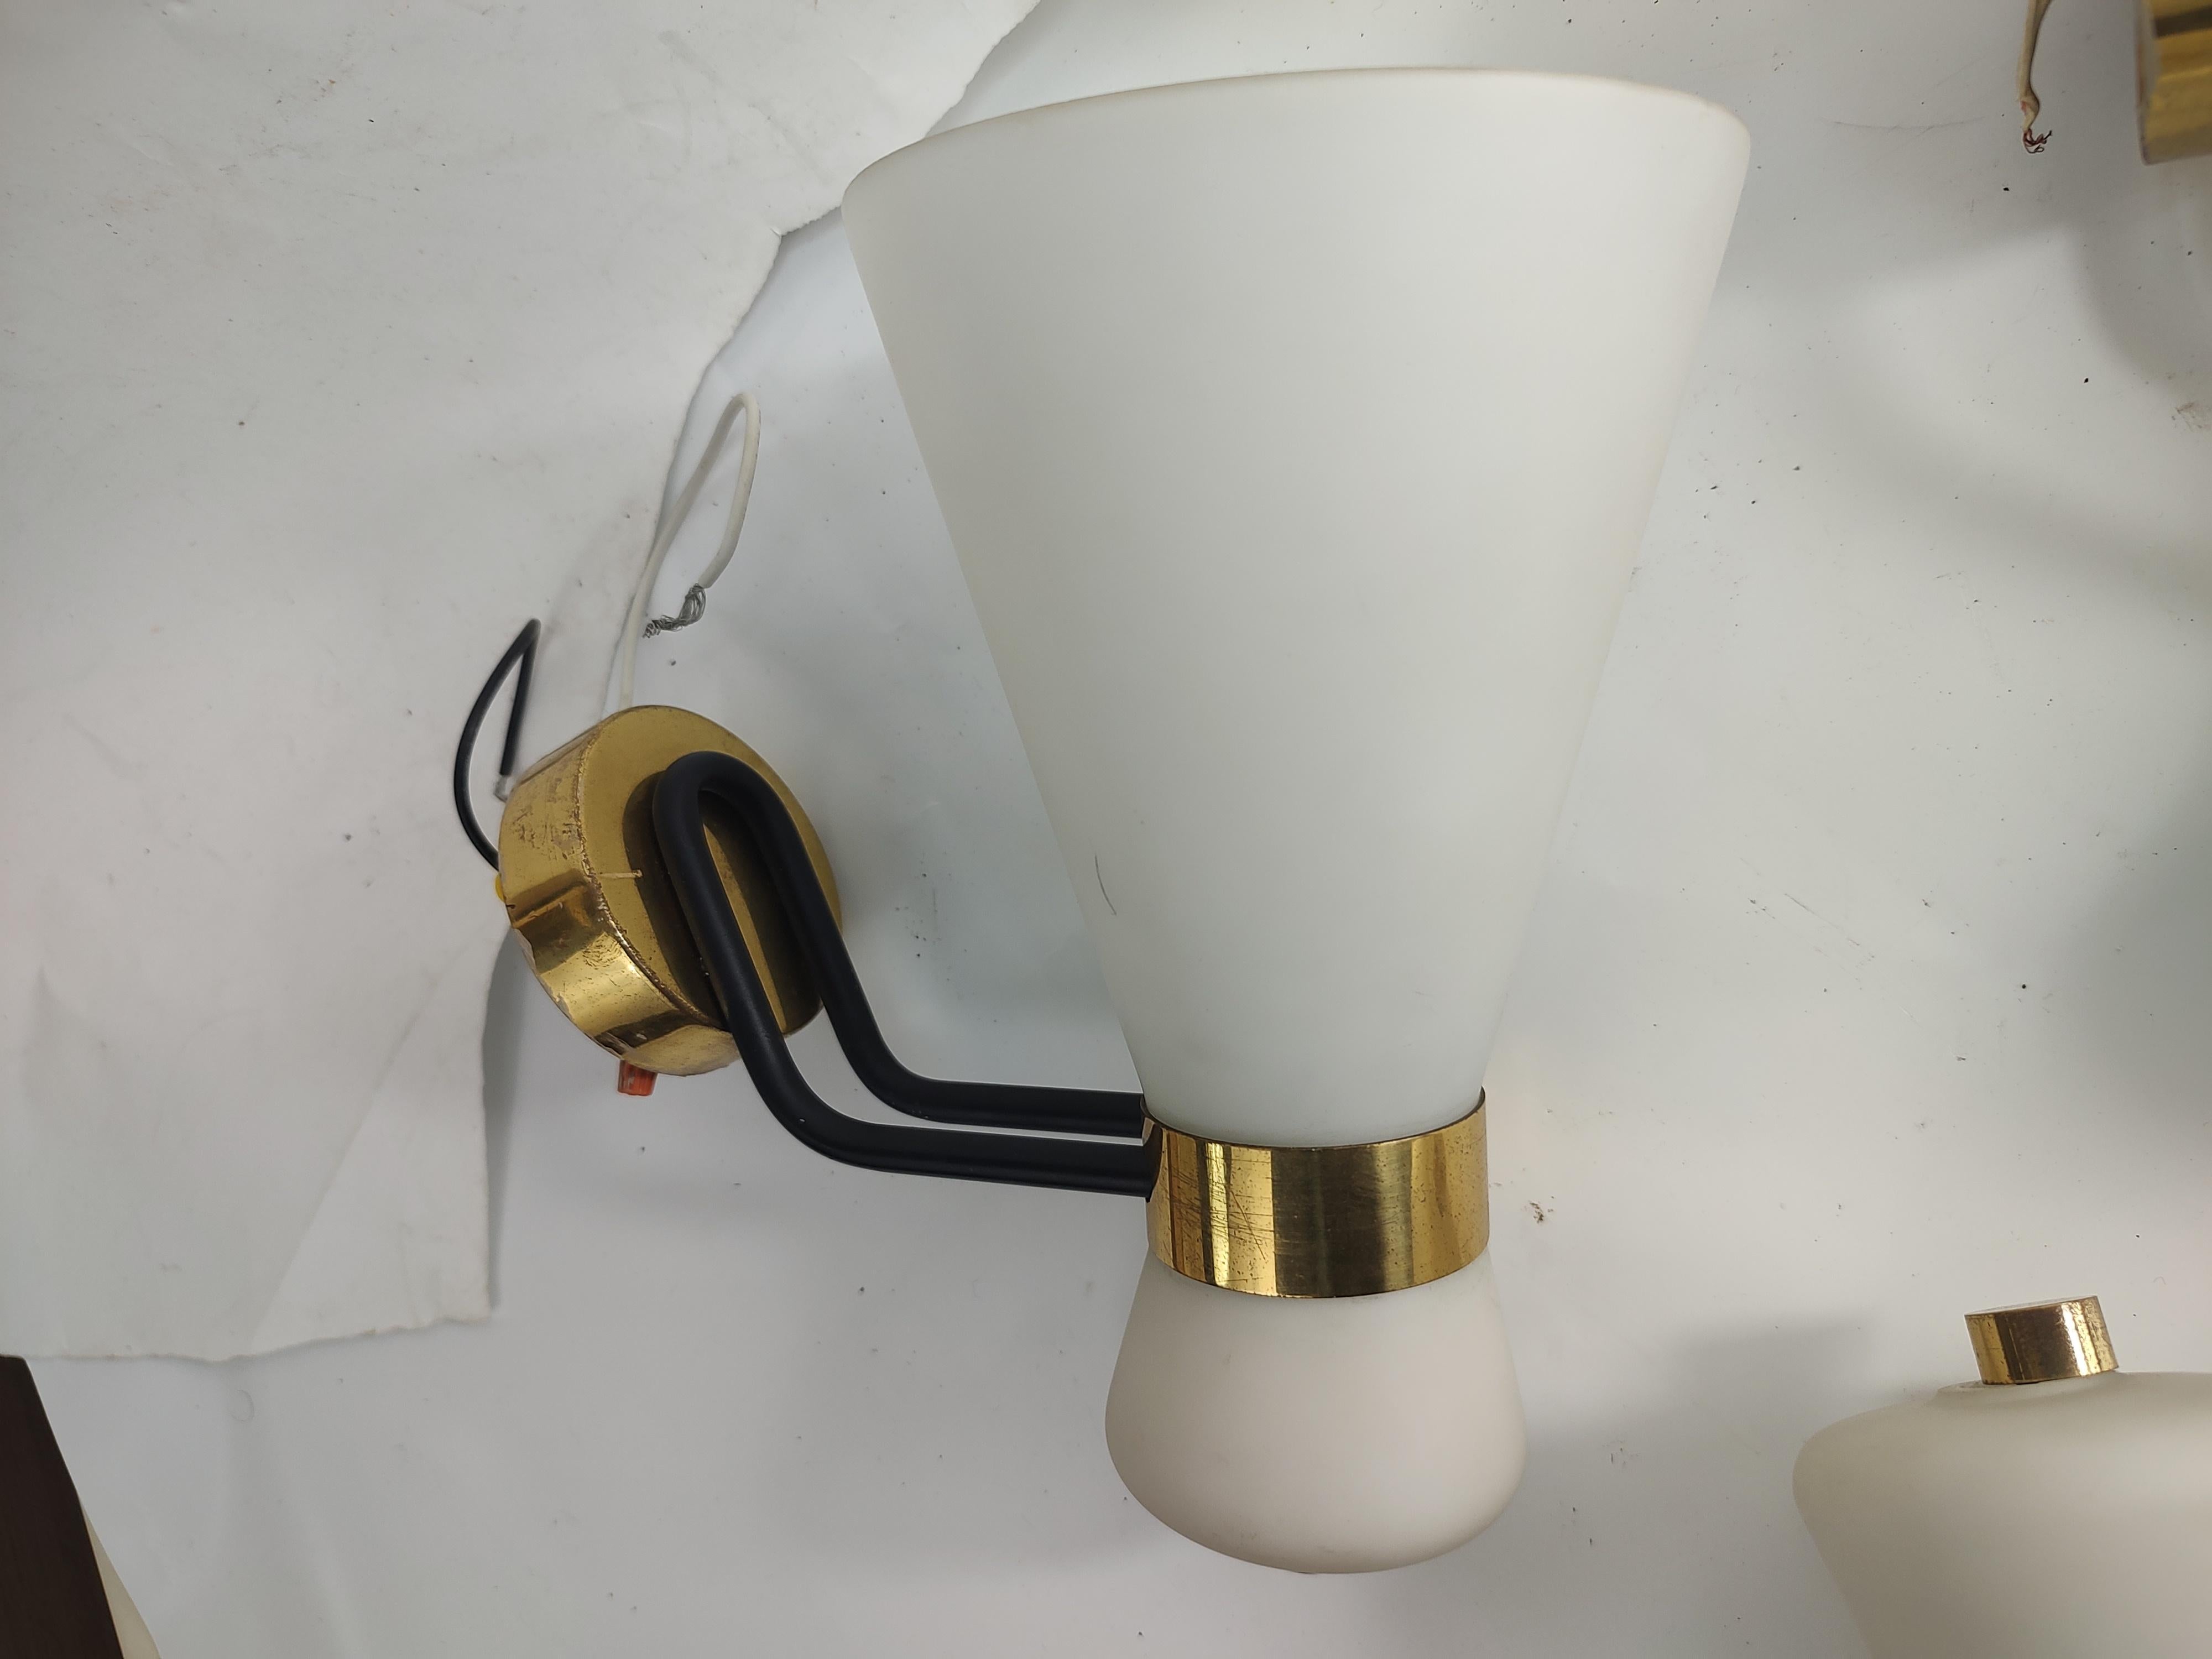 Fantastic set of 3 single light wall sconces with frosted glass shades. Brass collar connected by a double black iron tube which in turn connects to a brass wall mount plate. In excellent vintage condition with minimal wear, age related. Wiring is